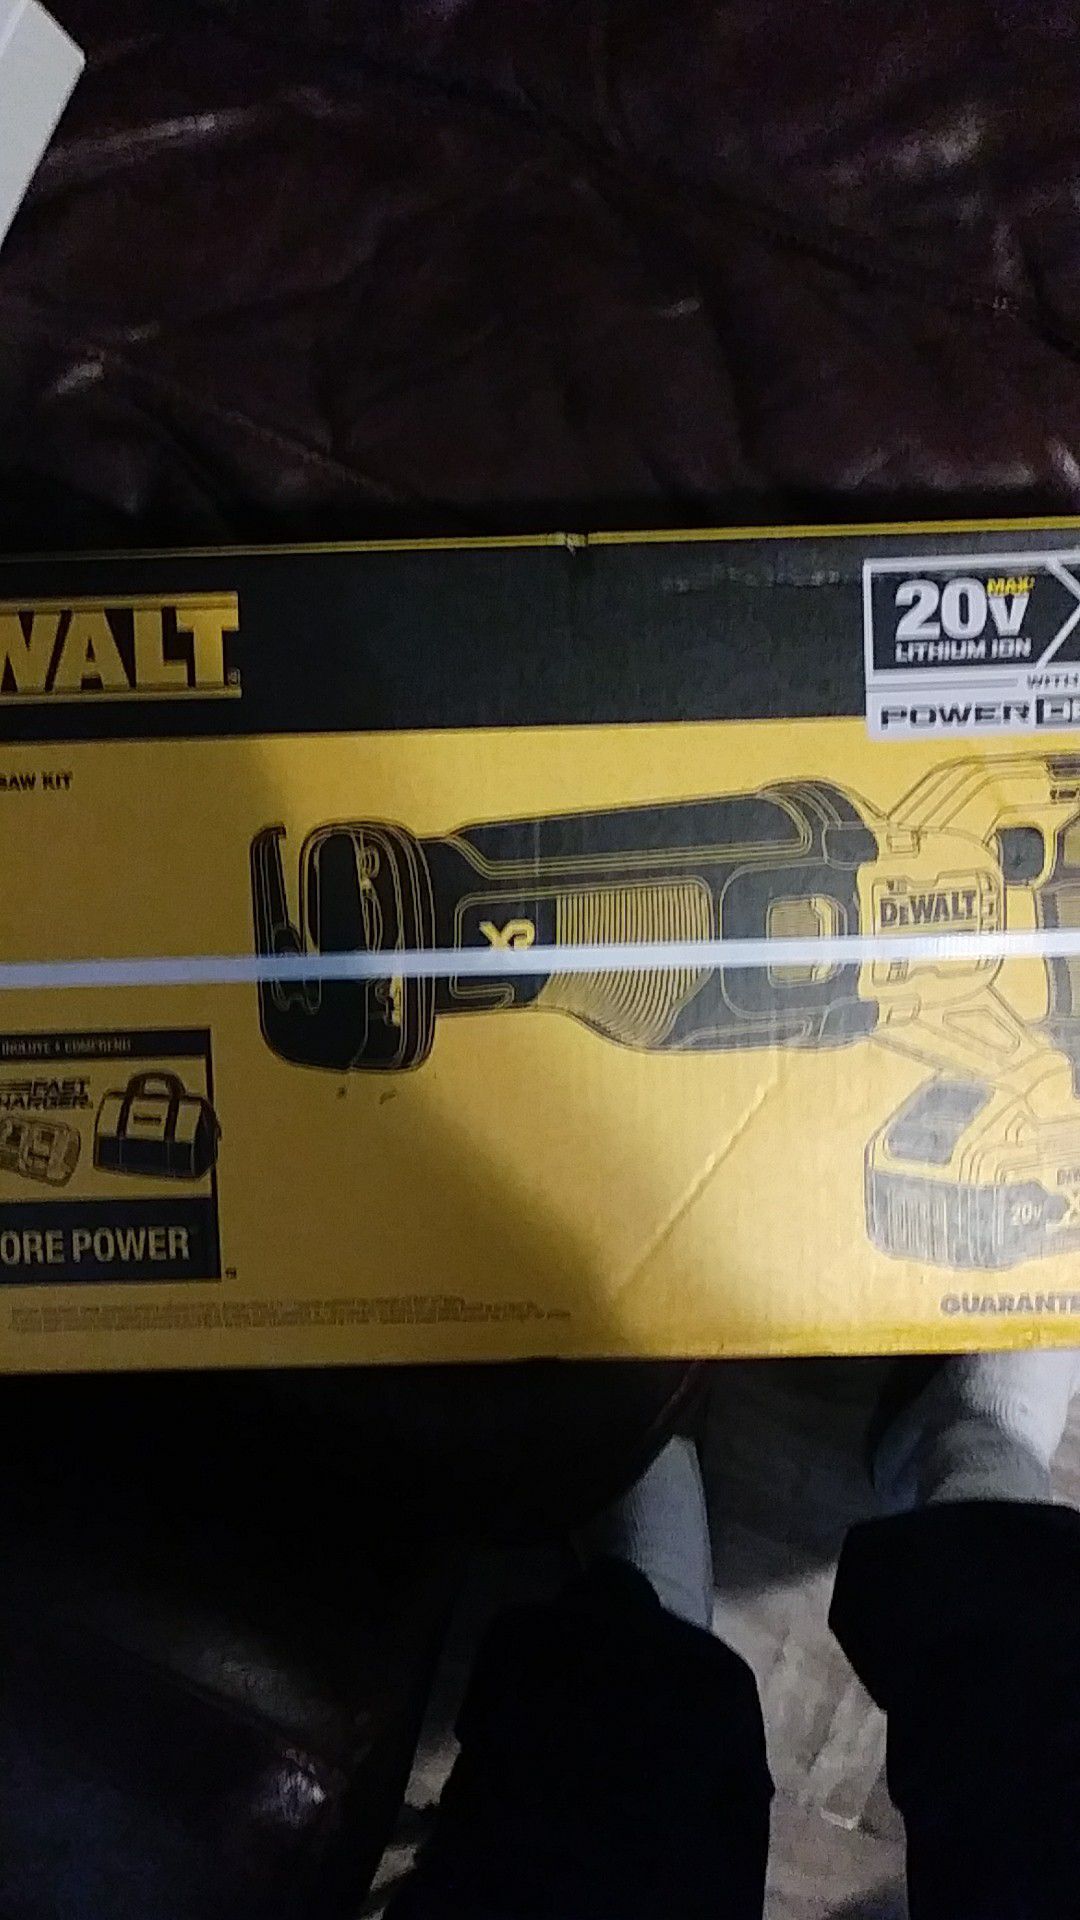 Dewalt 20 v xr with fast charger and 8 ah battery reciprocating saw with new power detect technology